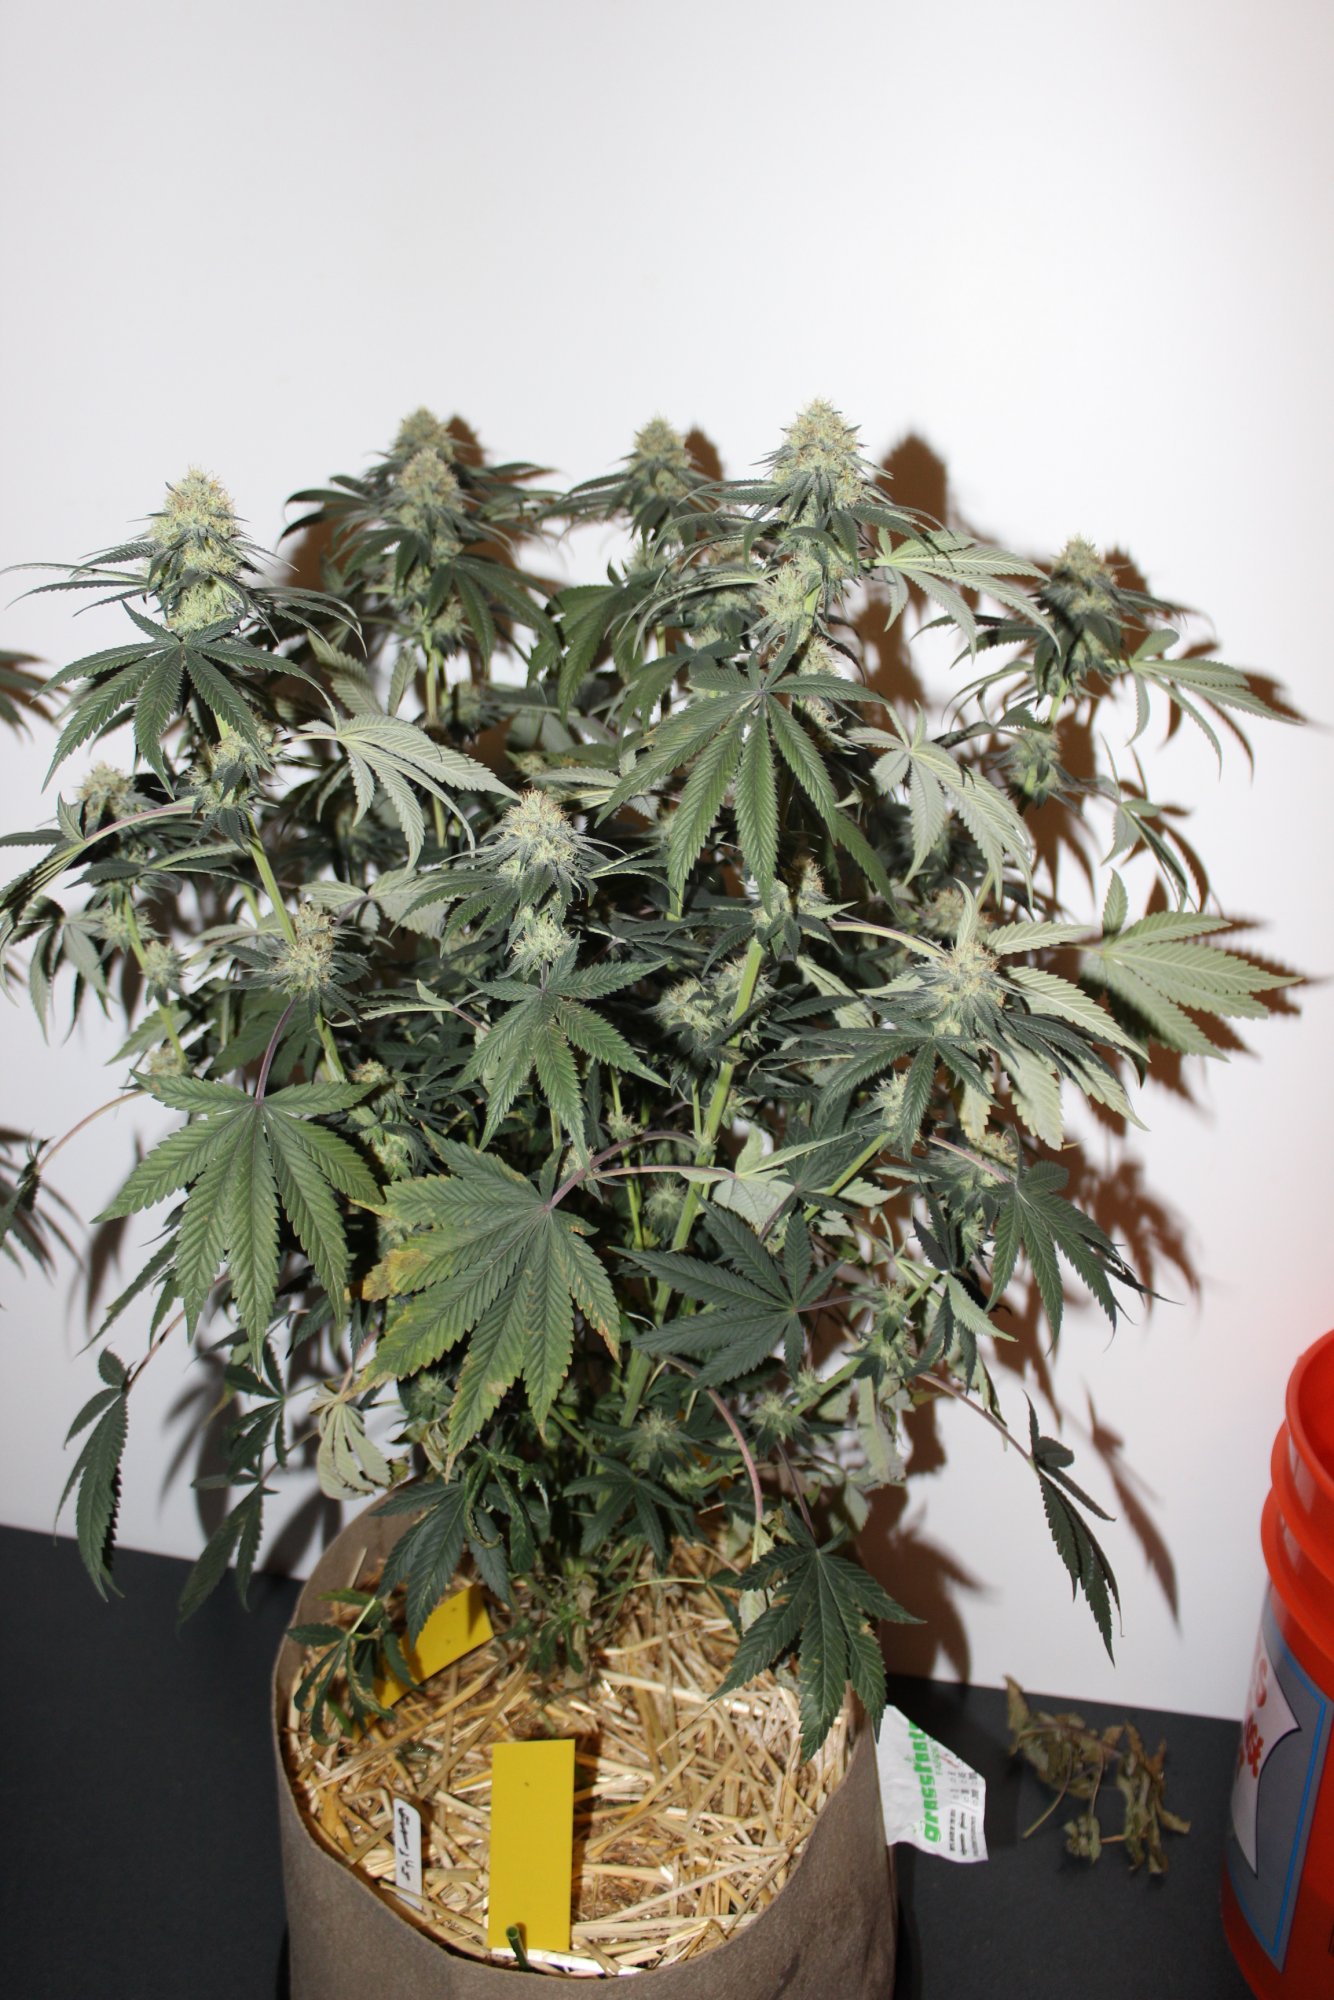 Time Bandit 4 flower day 33